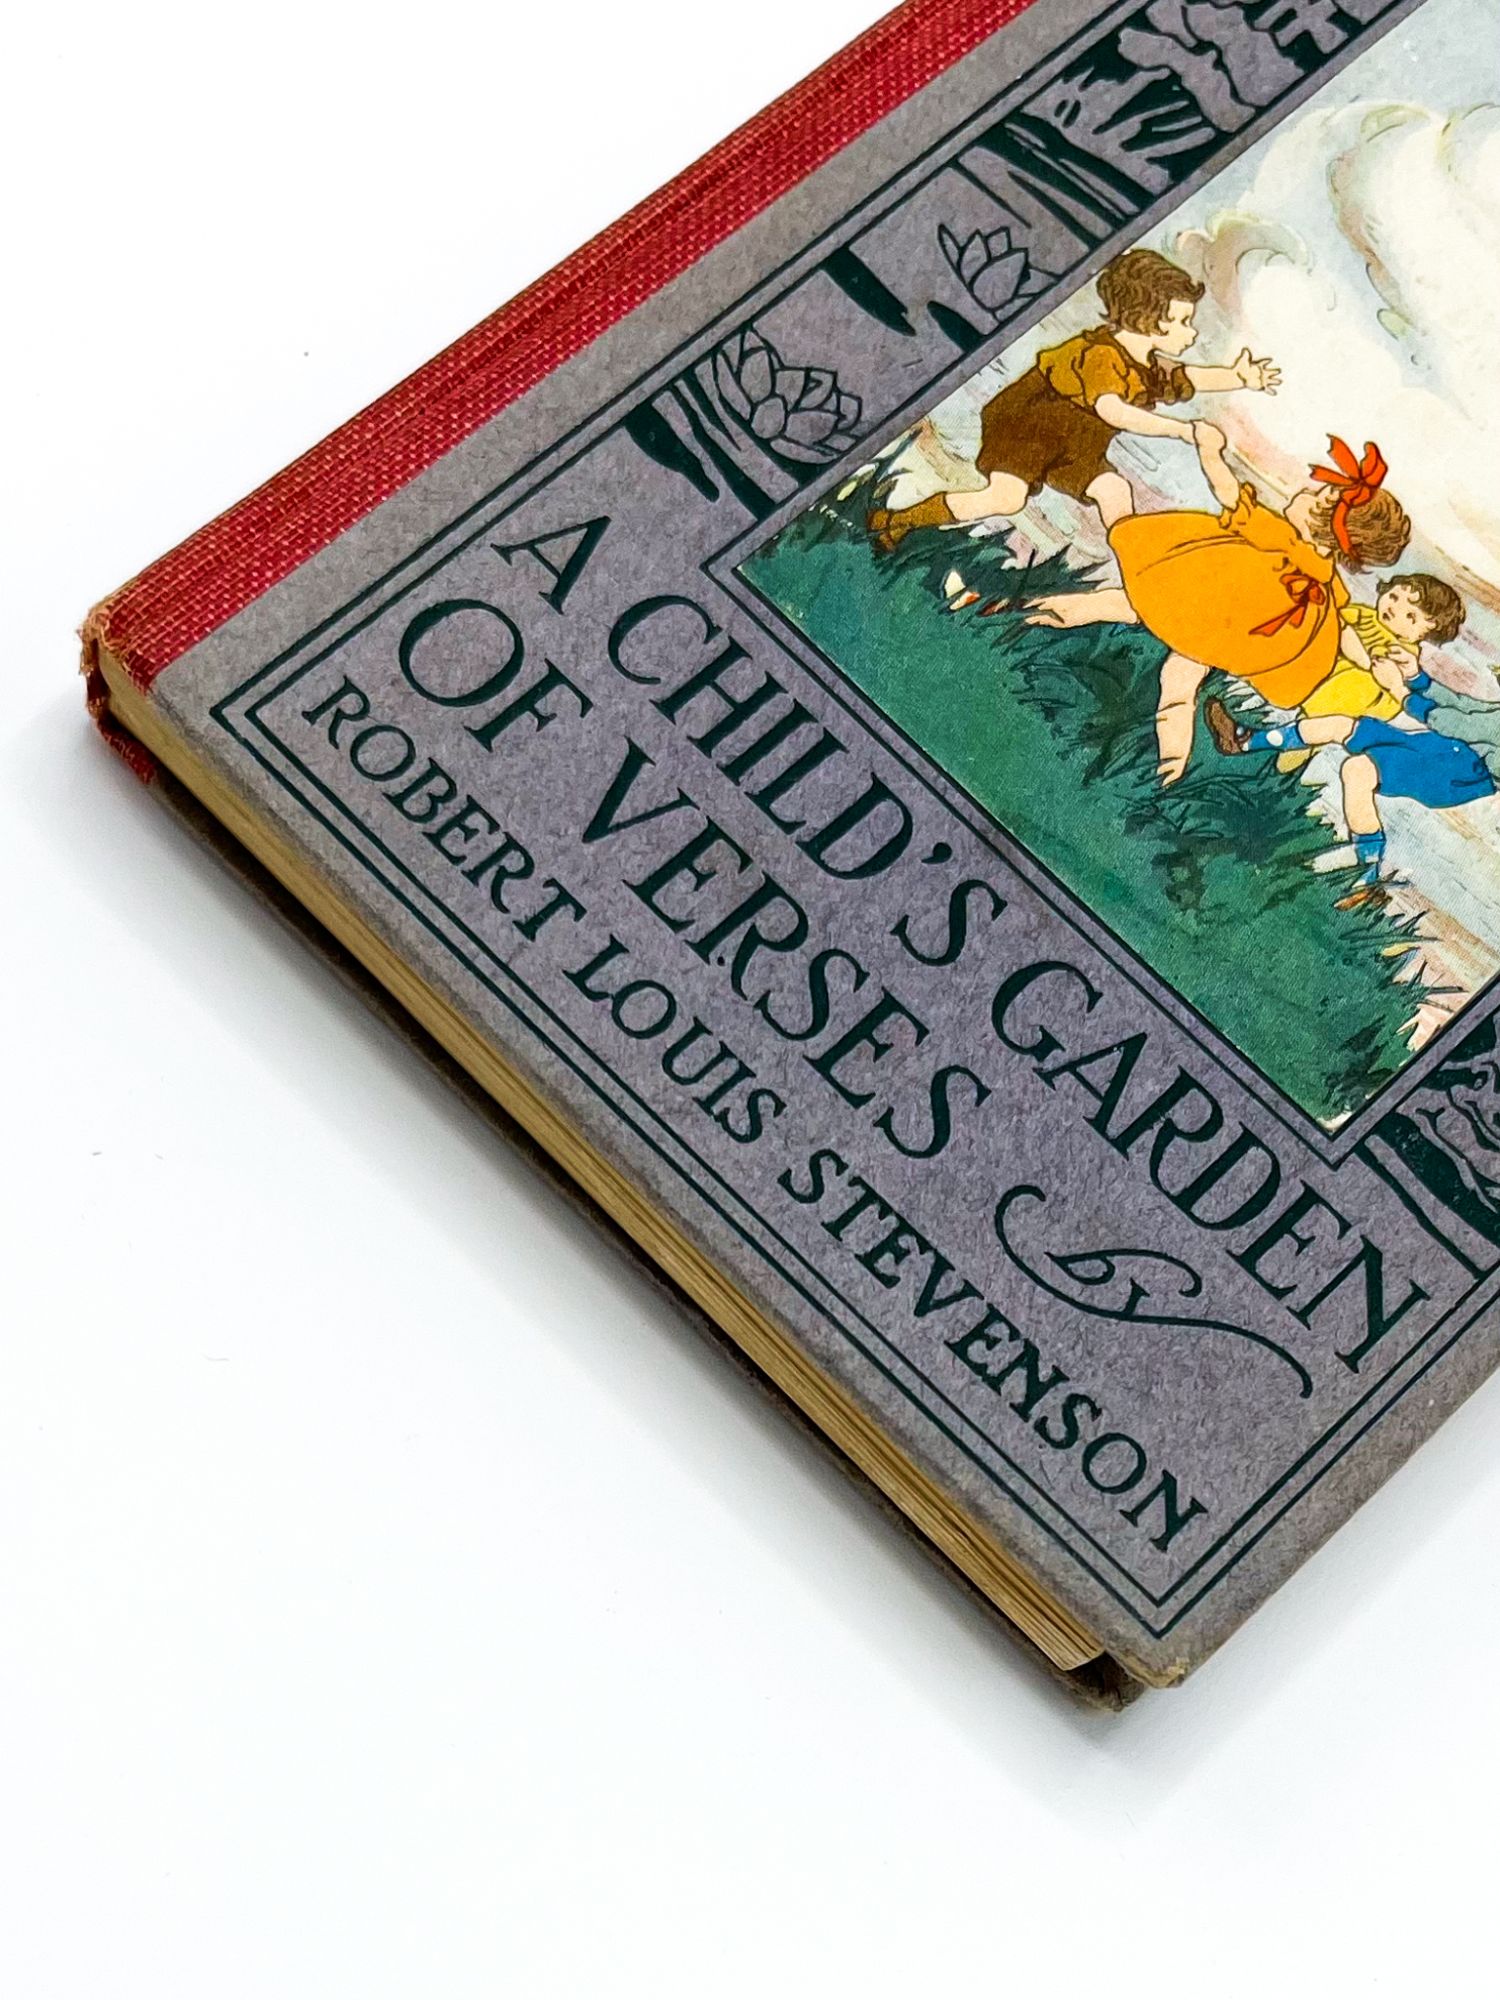 A CHILD'S GARDEN OF VERSES by Margaret Campbell Hoopes, Robert Louis  Stevenson on Type Punch Matrix